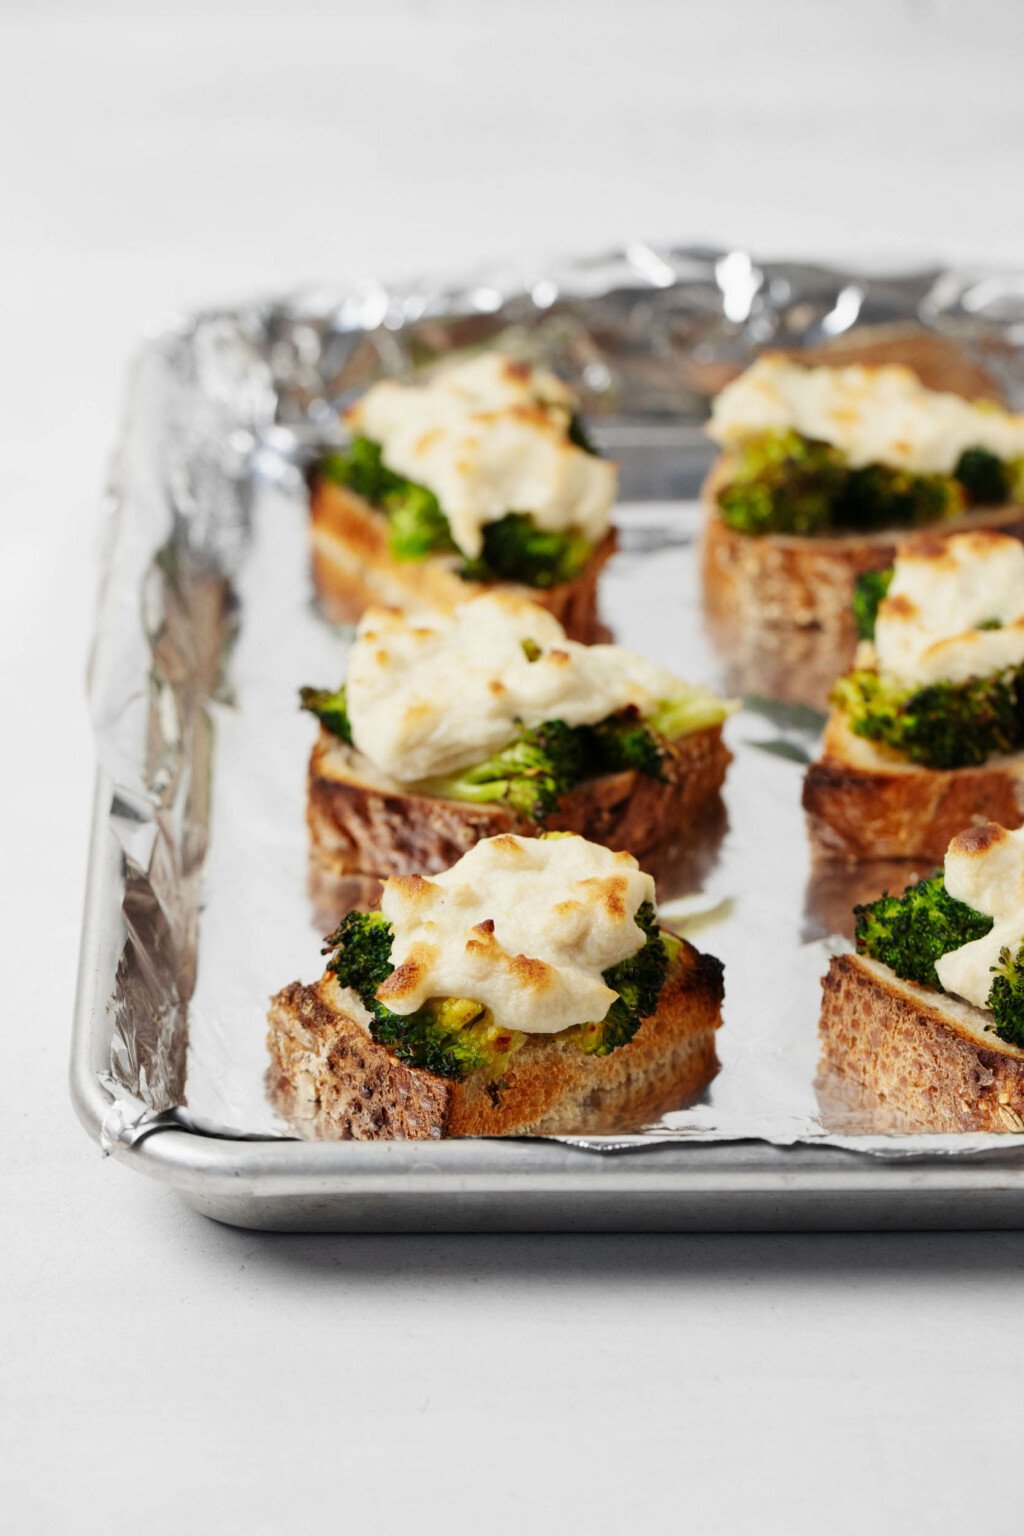 Slices of bread, each topped with cooked broccoli and toasted mozzarella cheese, are lined up on a baking sheet with foil.